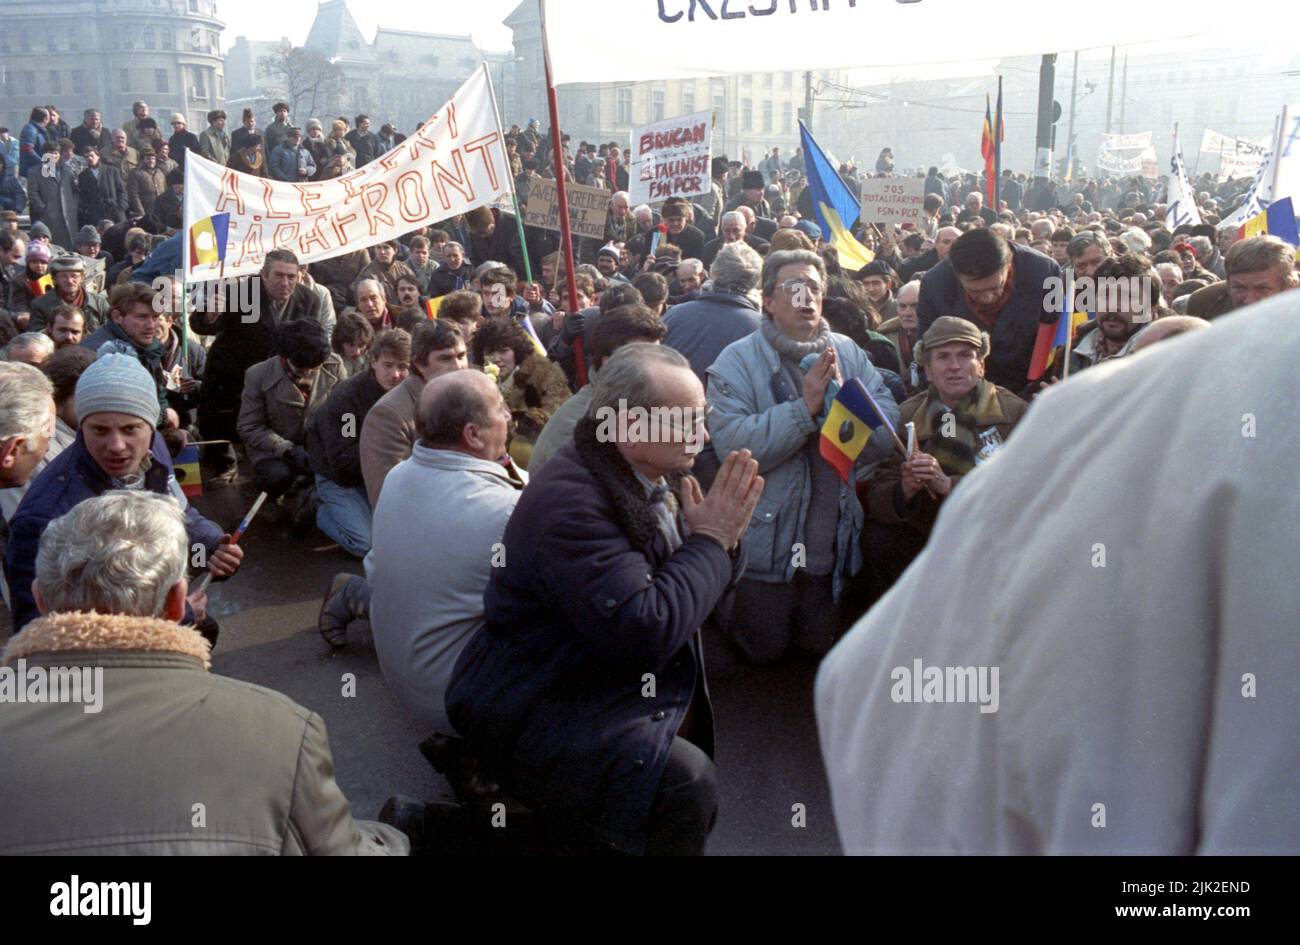 Bucharest, Romania, January 28, 1990. A month after the anti-communist revolution, supporters of the historical (right-wing) parties march against the new political system in place,  composed mainly of former communist officials. The participants stopped for a moment of prayer. Stock Photo